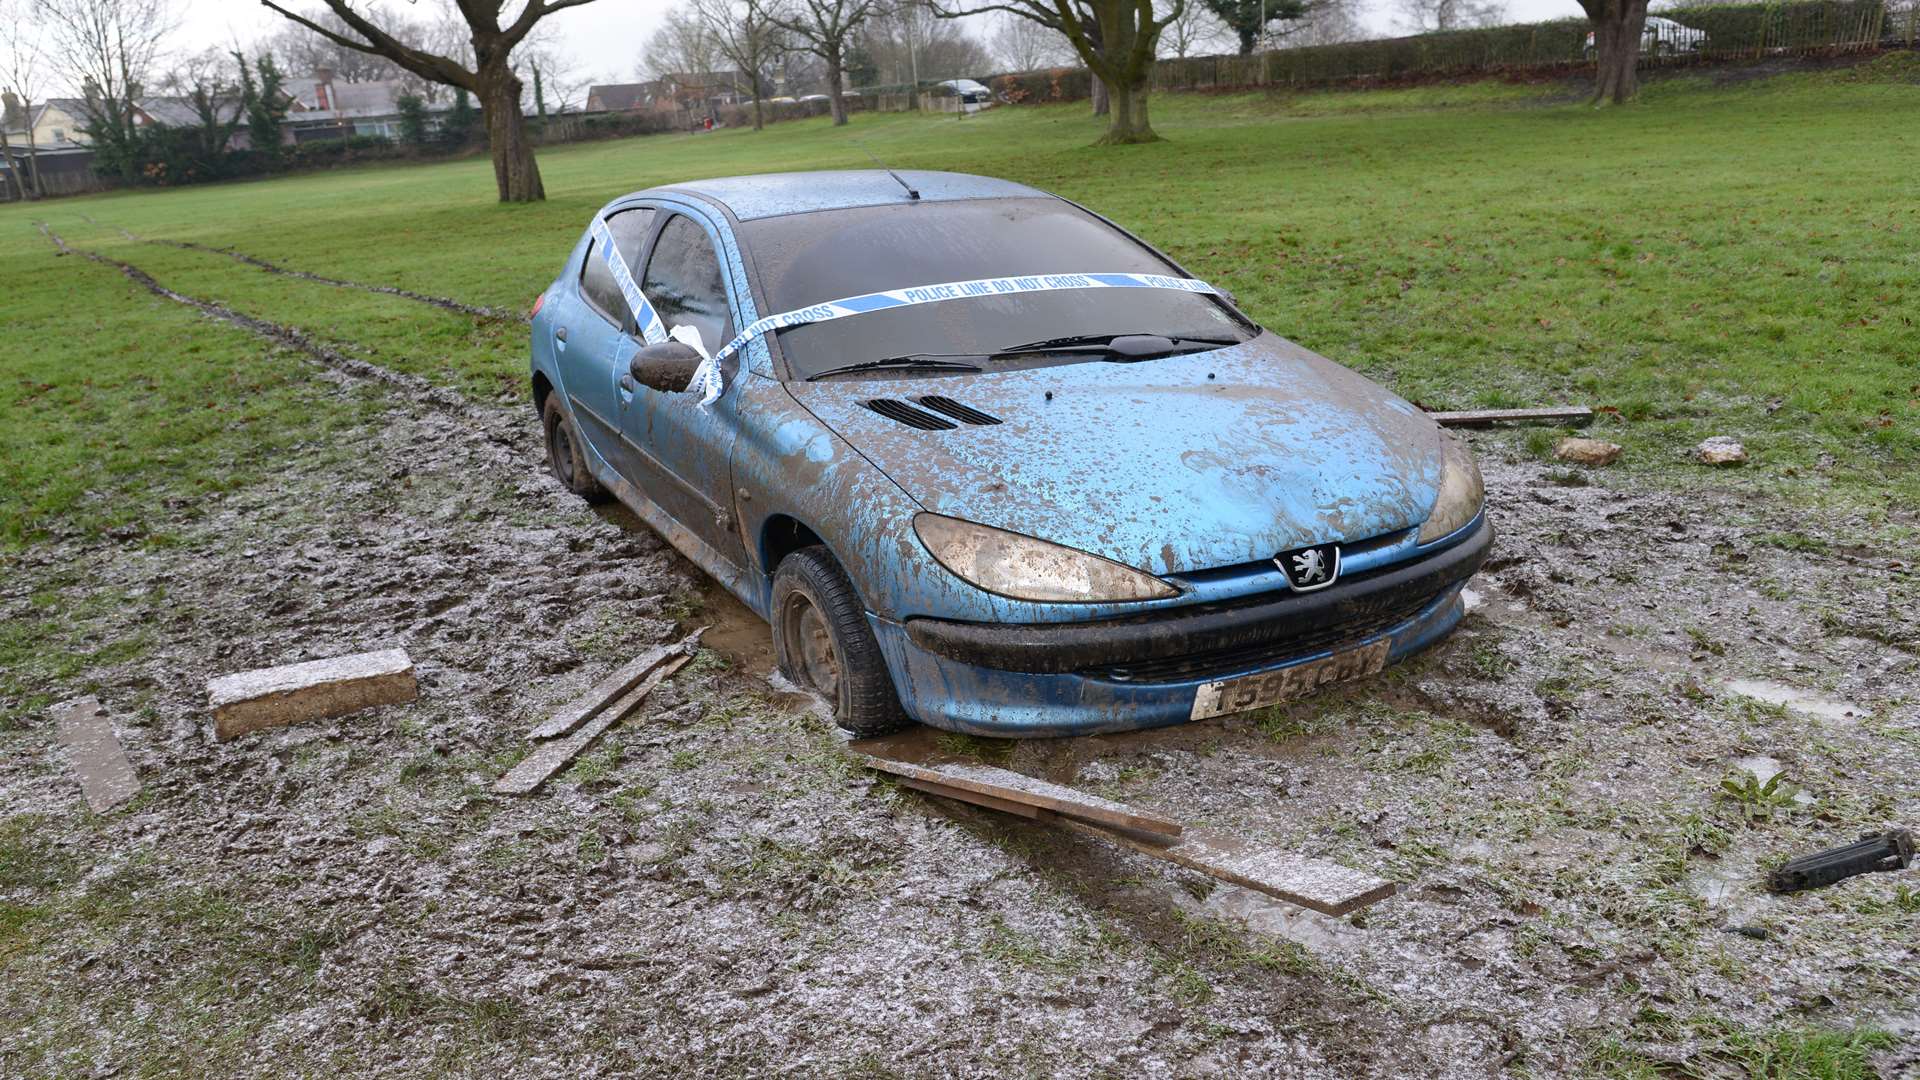 This car was abandoned in the middle of Kennington Recreation ground after getting stuck in the mud